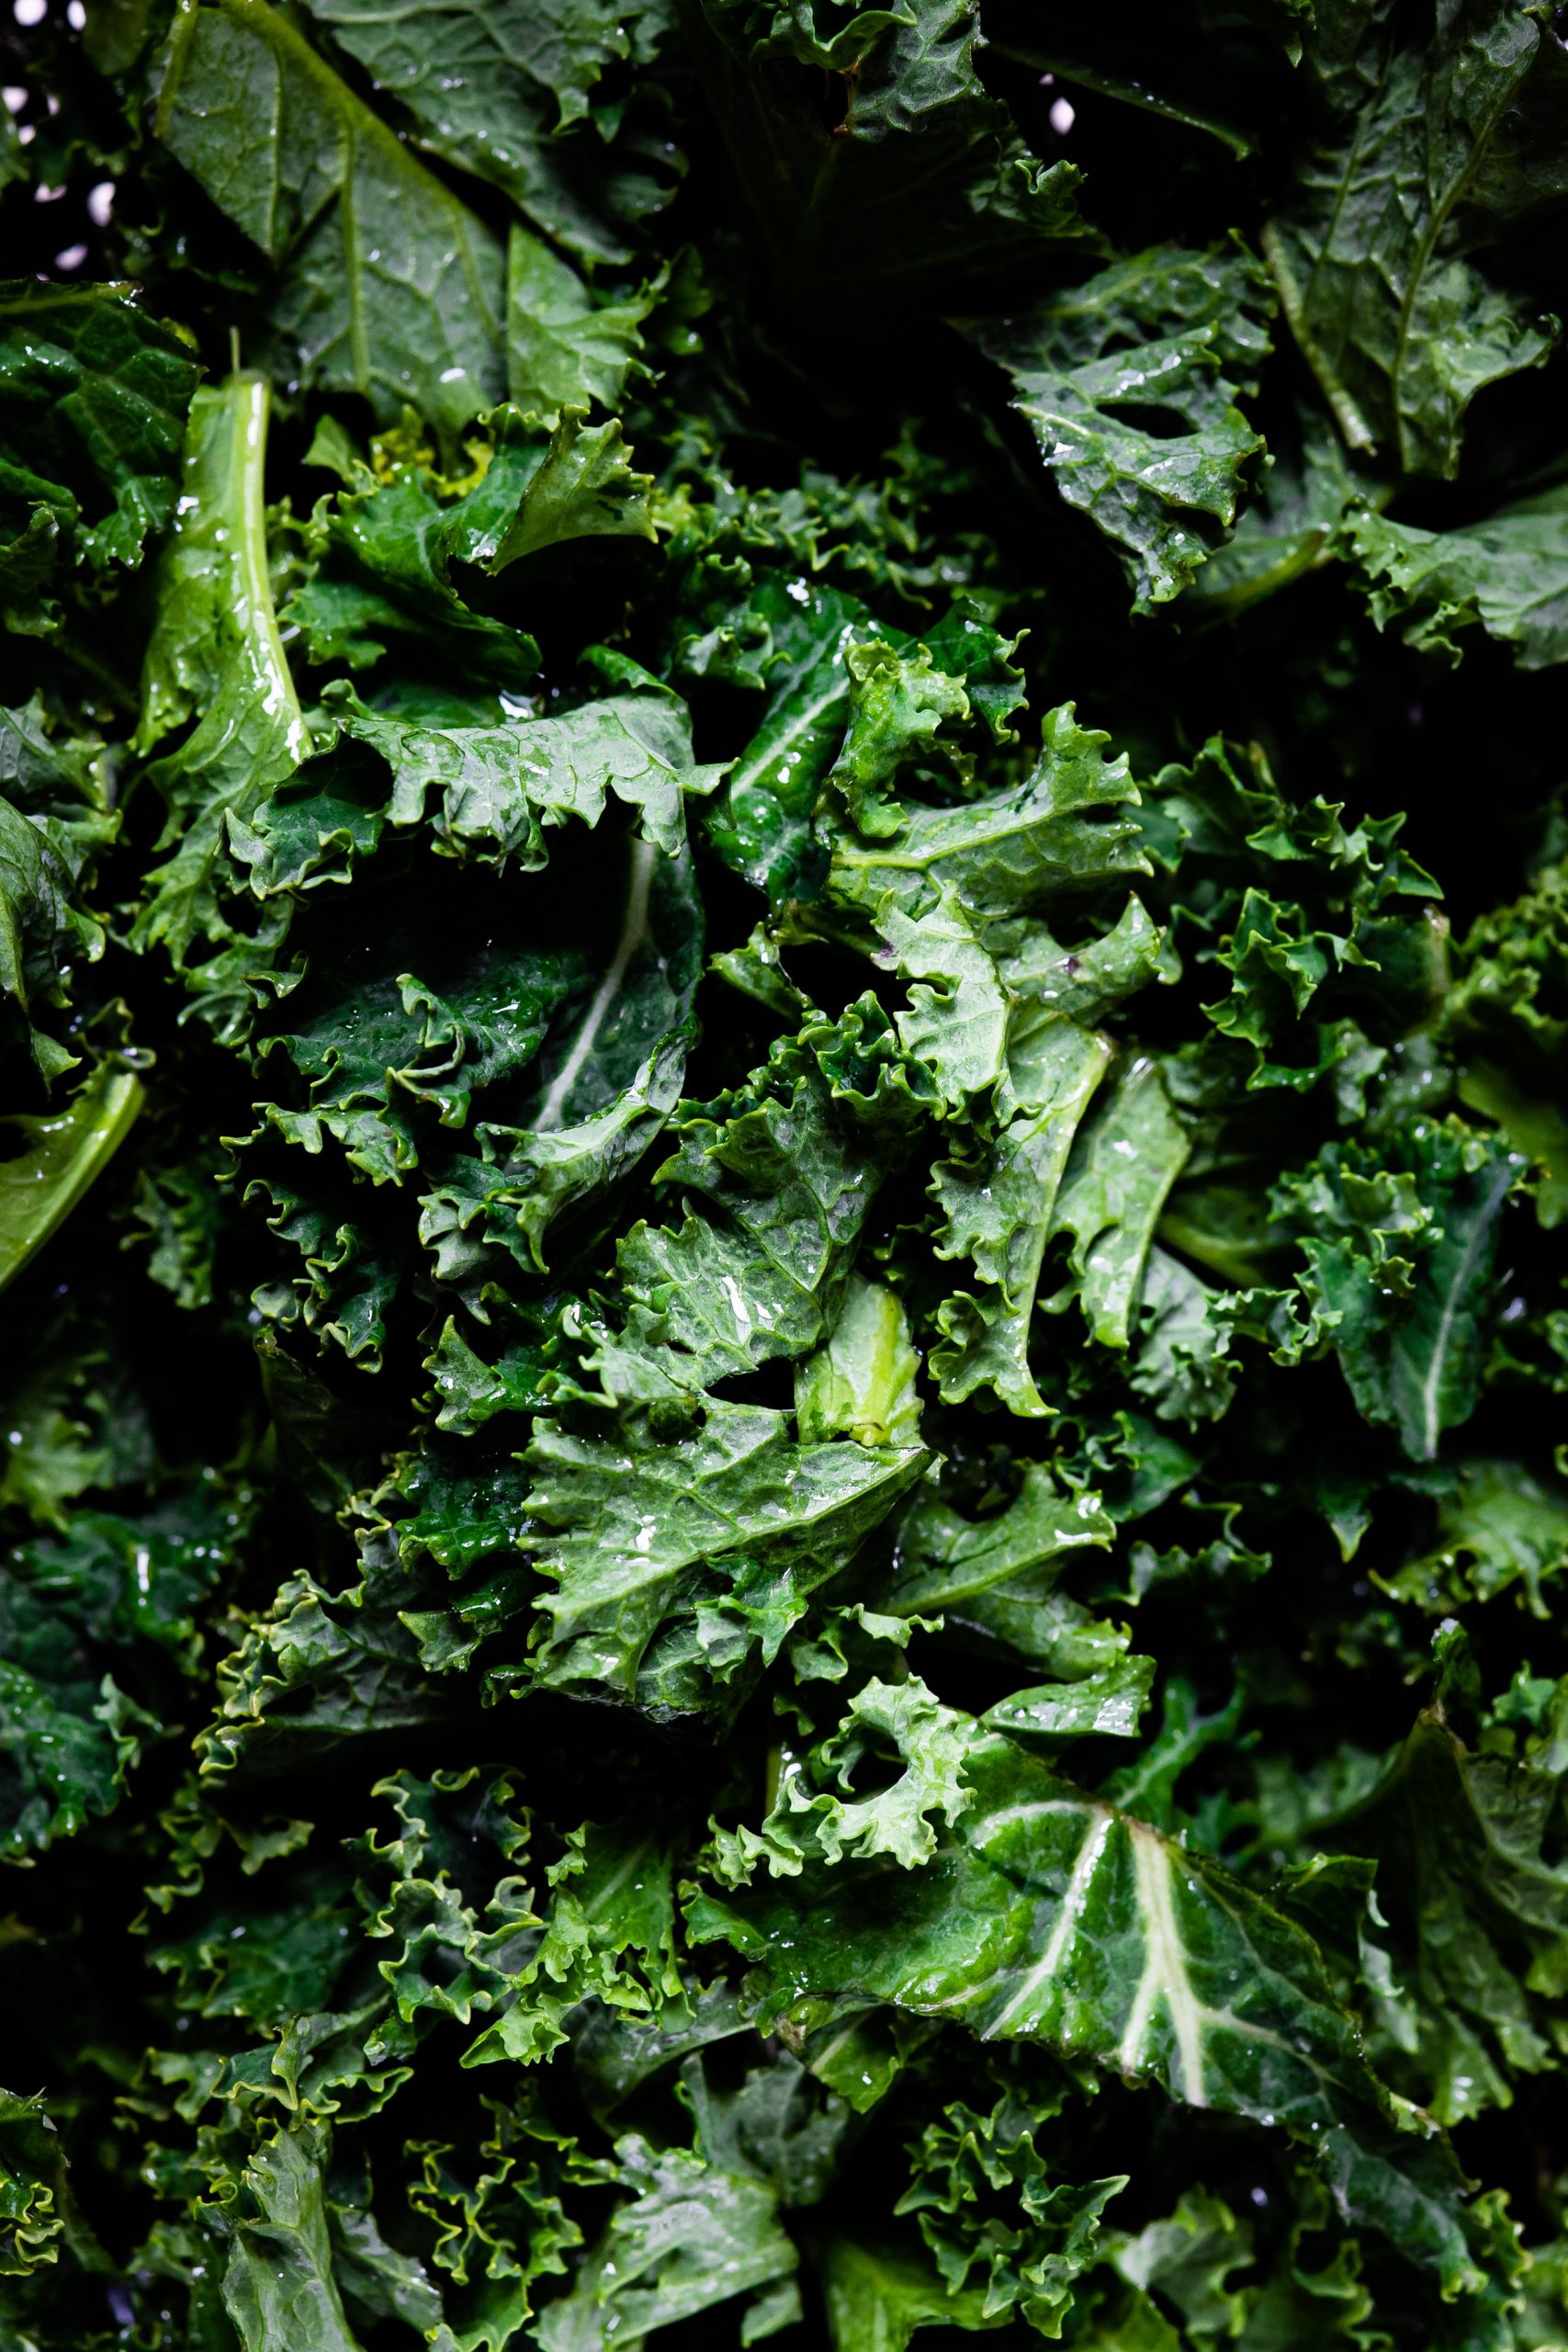 Is Kale Lettuce? Is There A Difference?